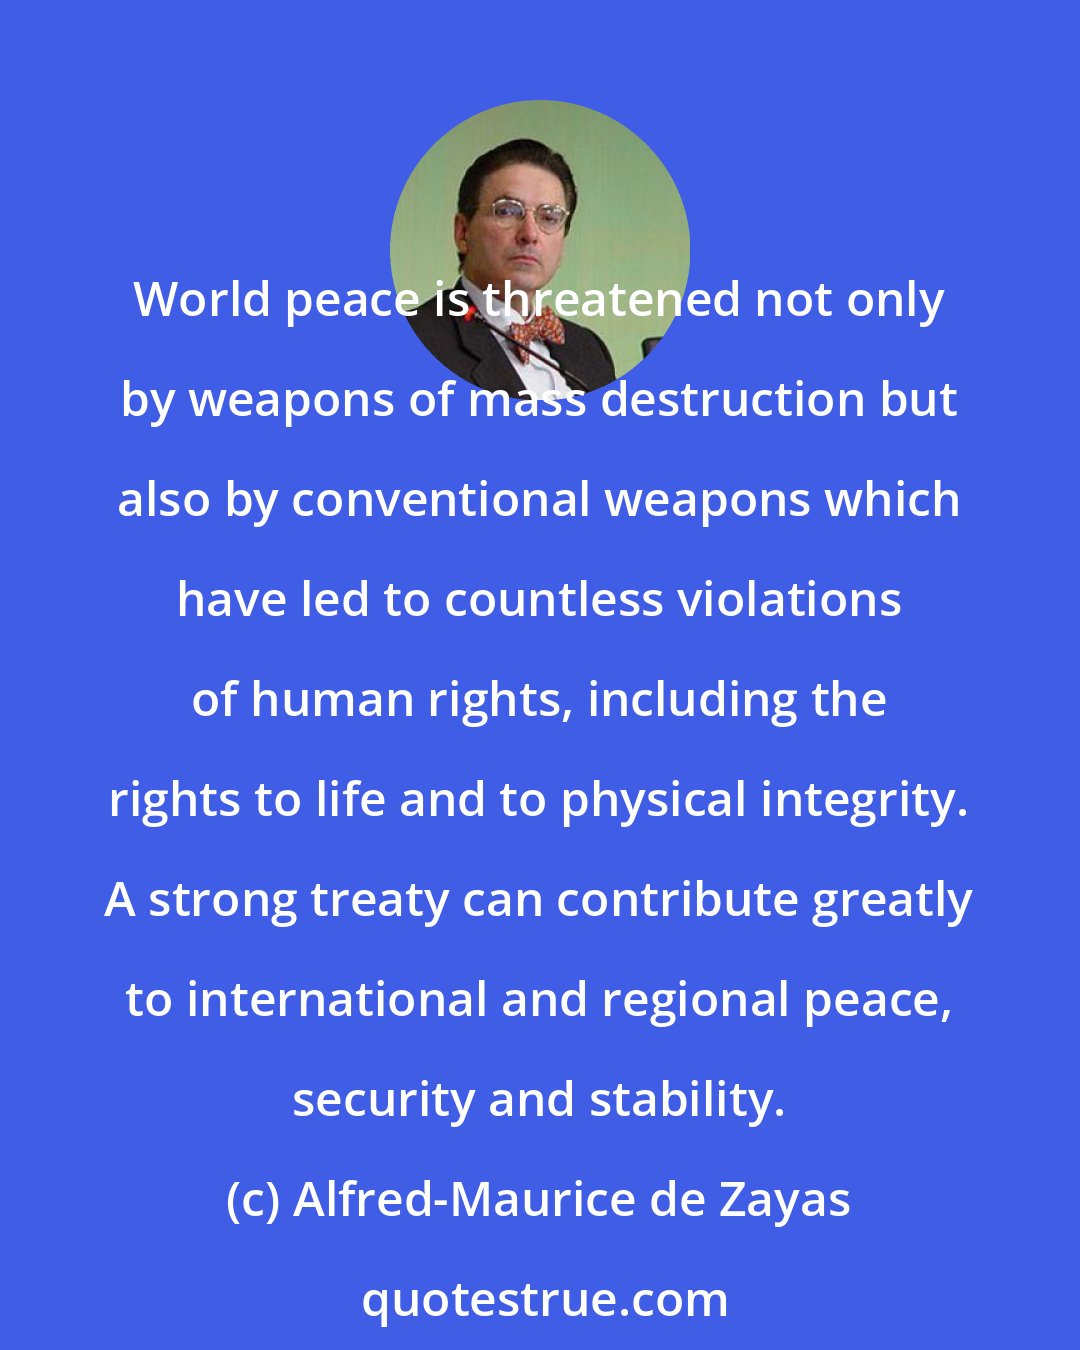 Alfred-Maurice de Zayas: World peace is threatened not only by weapons of mass destruction but also by conventional weapons which have led to countless violations of human rights, including the rights to life and to physical integrity. A strong treaty can contribute greatly to international and regional peace, security and stability.